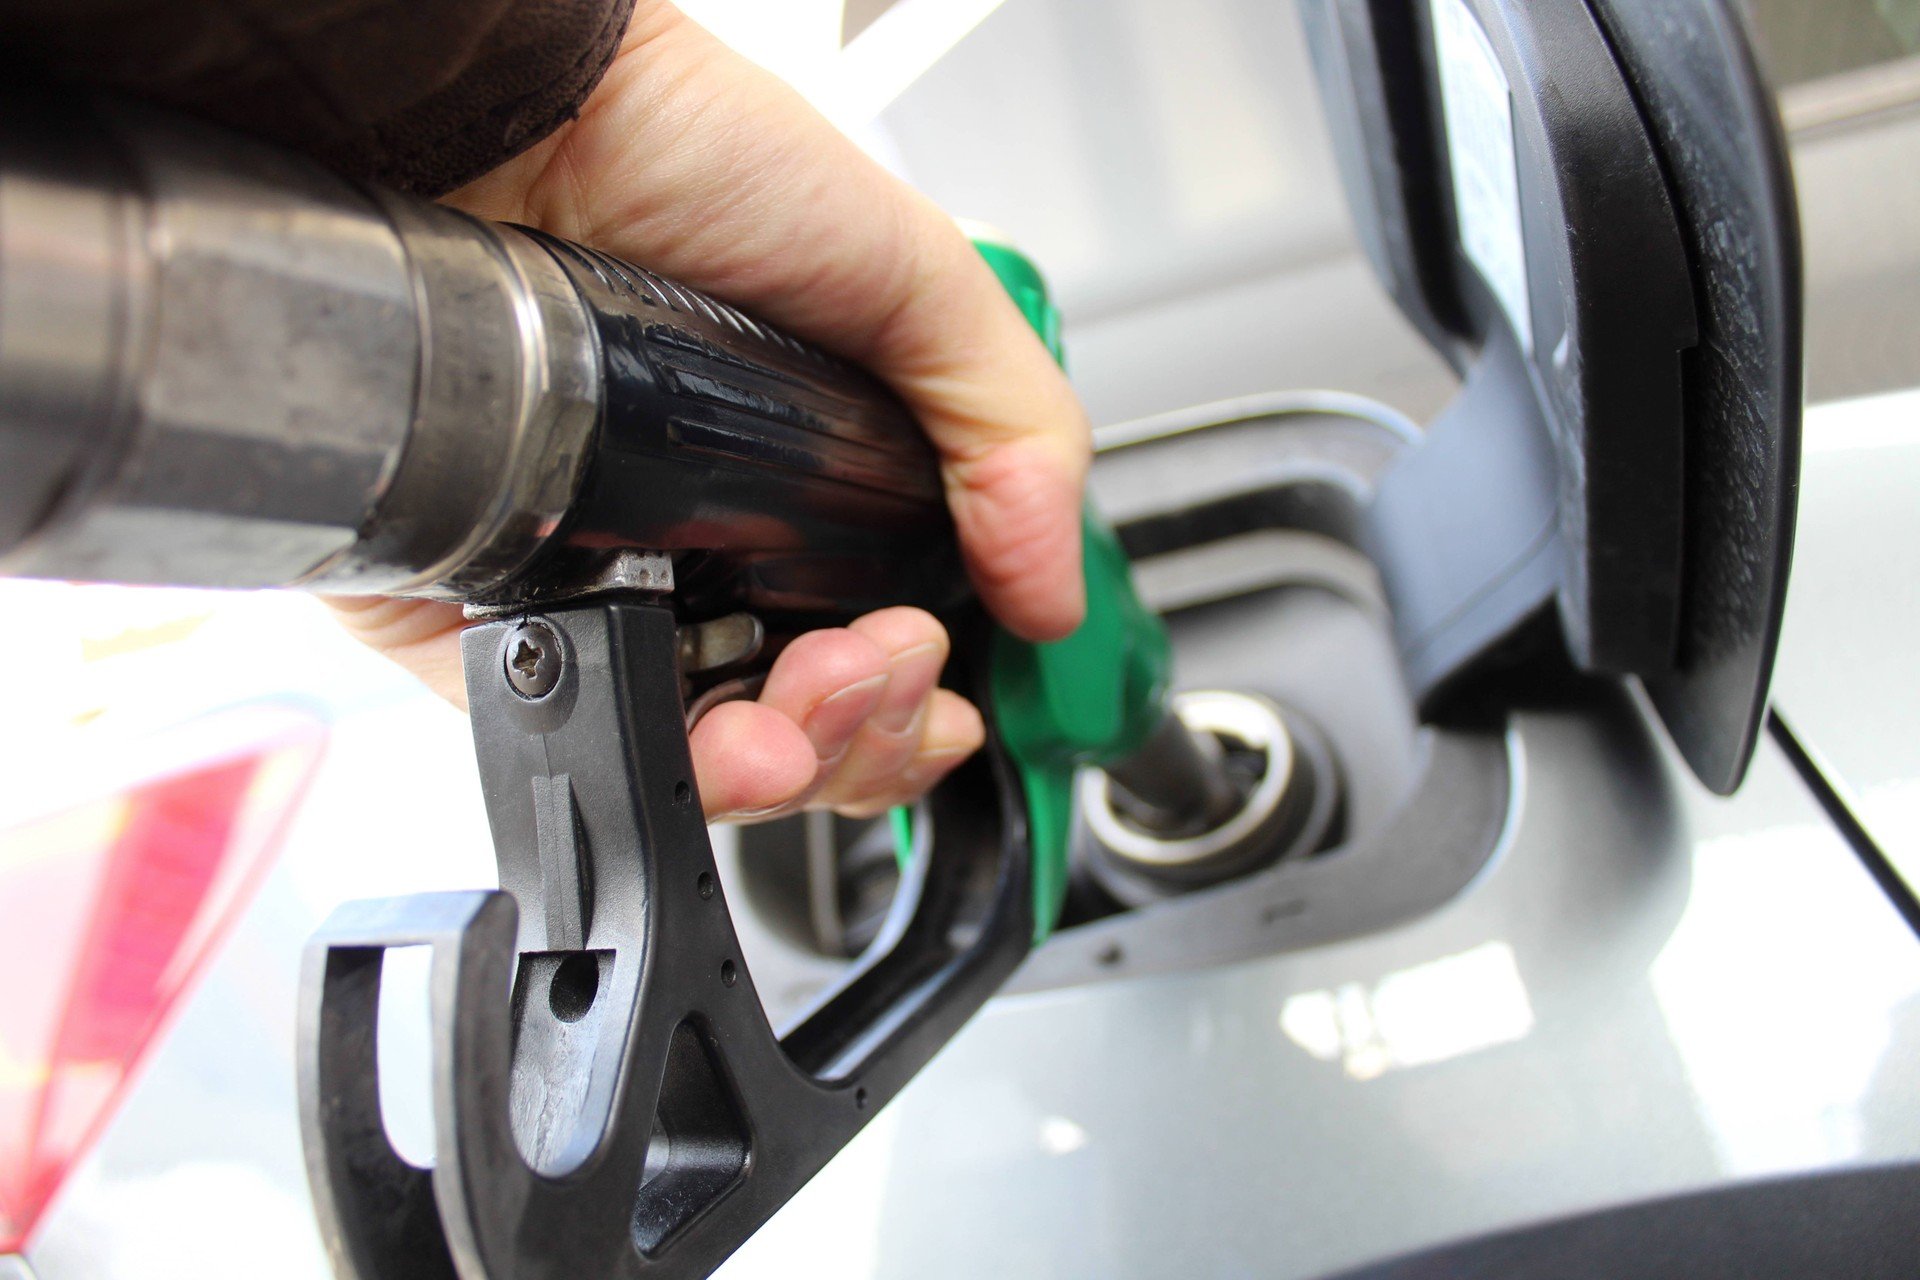 Fuel, gasoline and diesel prices continue to rise